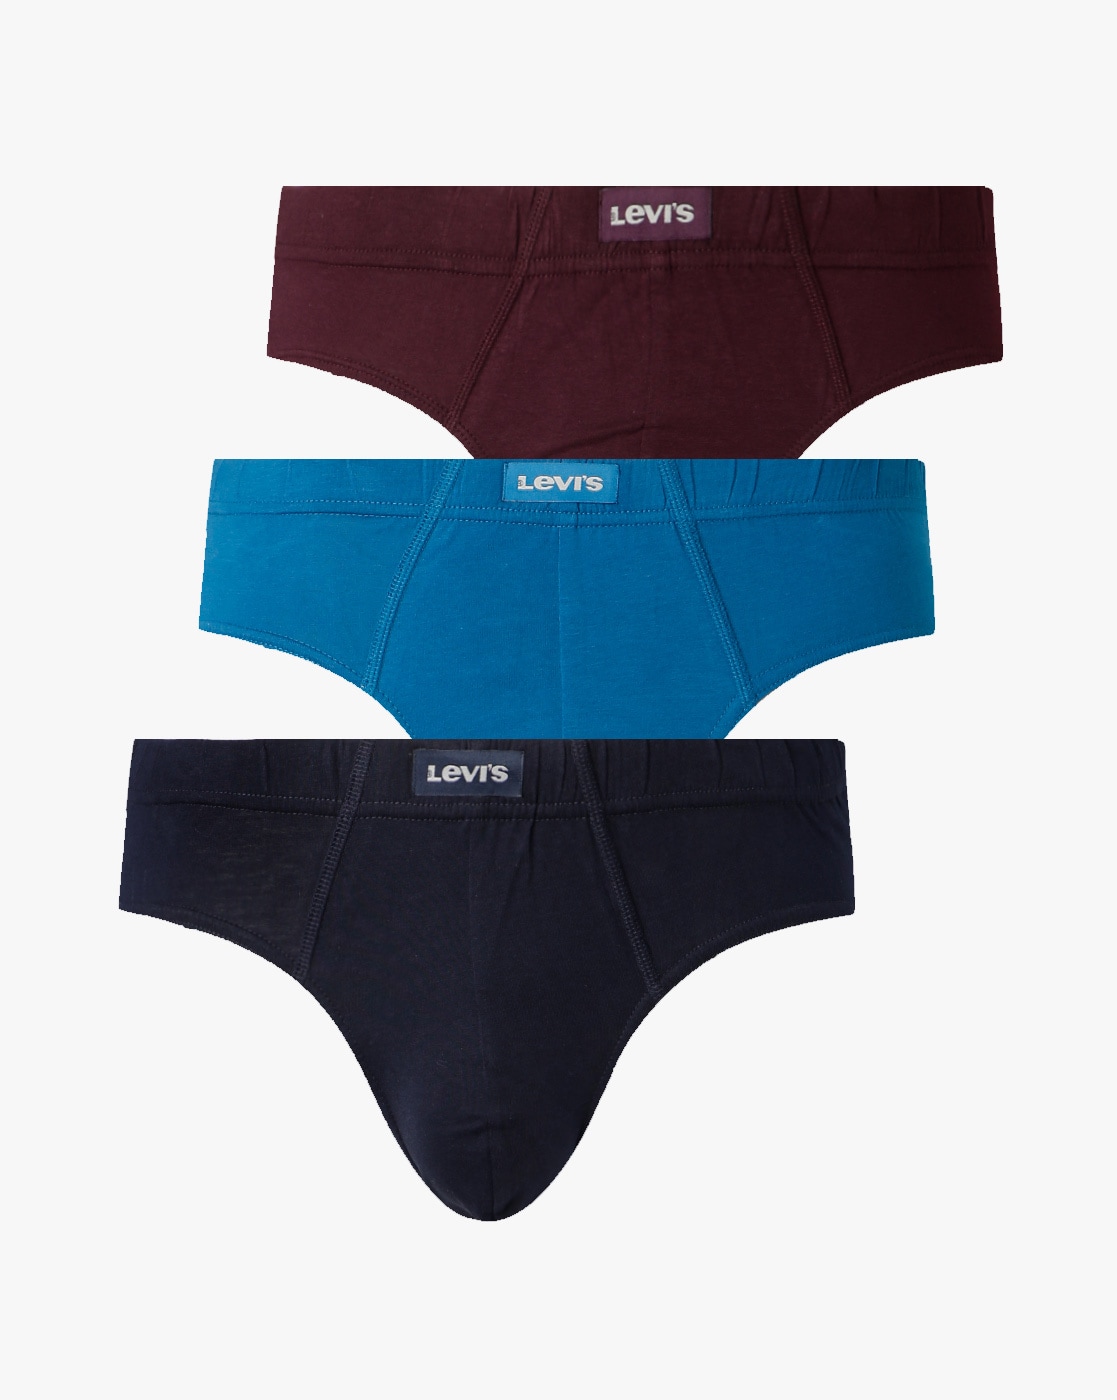 Buy Assorted Briefs for Men by LEVIS 